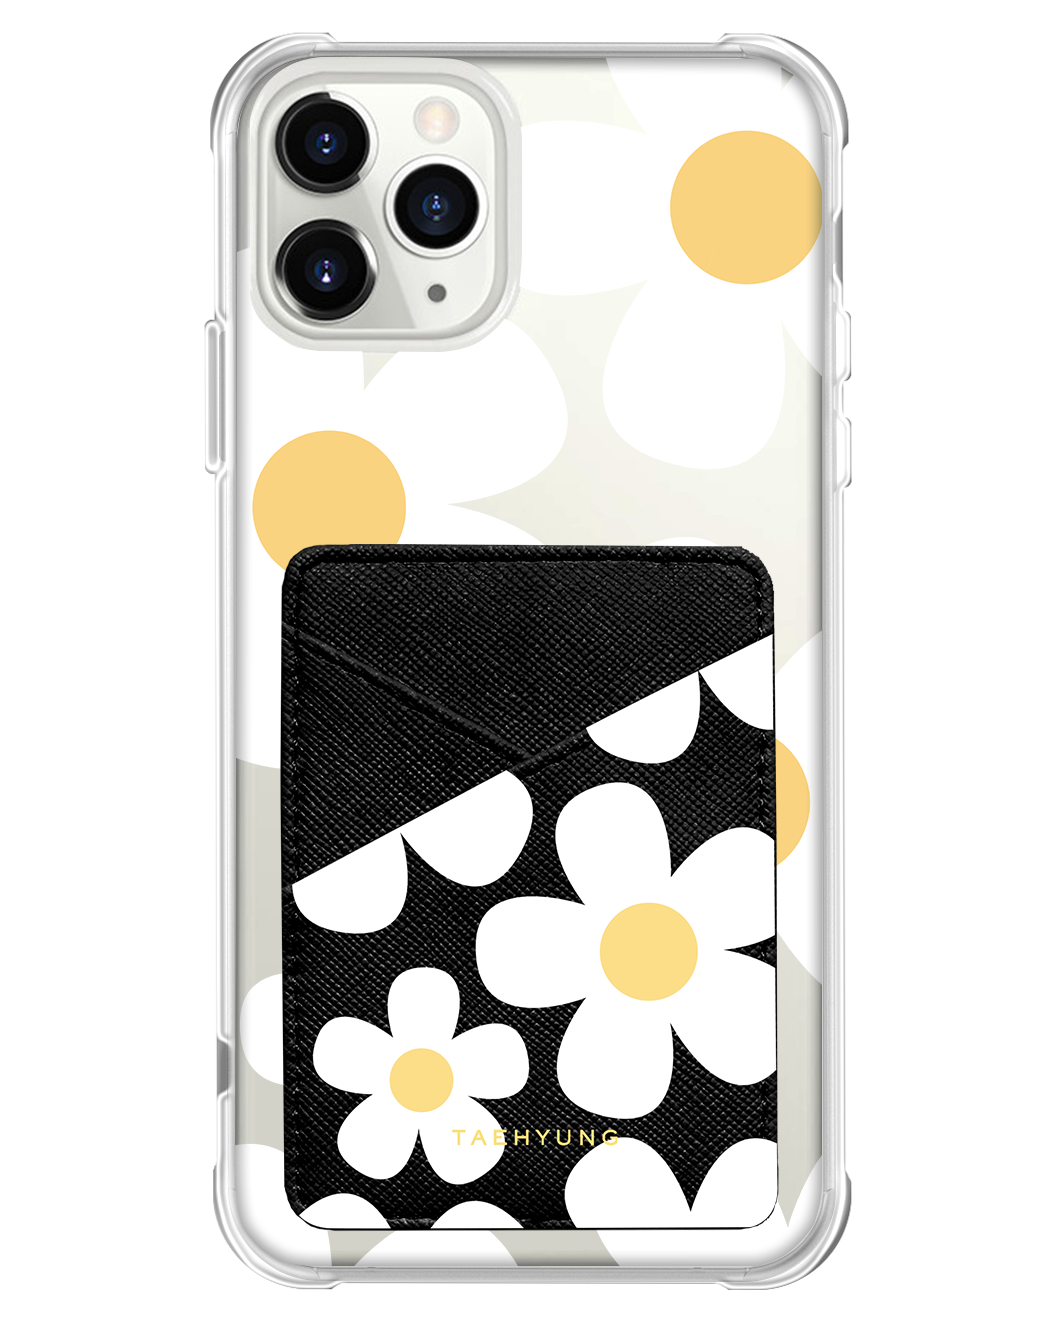 iPhone Phone Wallet Case - Daisy 1.0